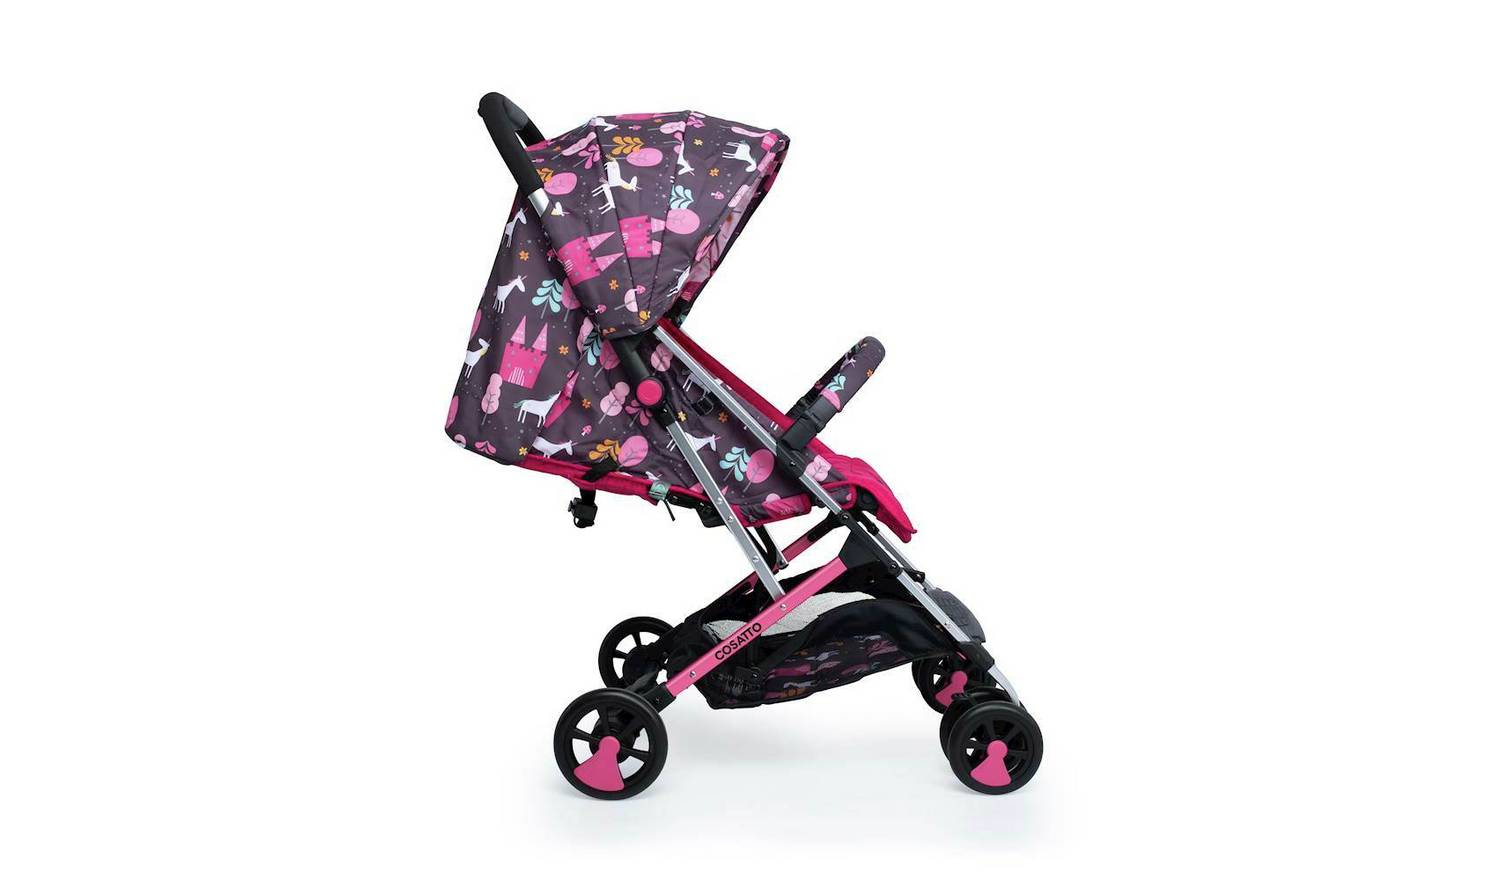 New Cosatto woosh 2 stroller Spectroluxe with raincover & bumper bar 0 to 25kg 